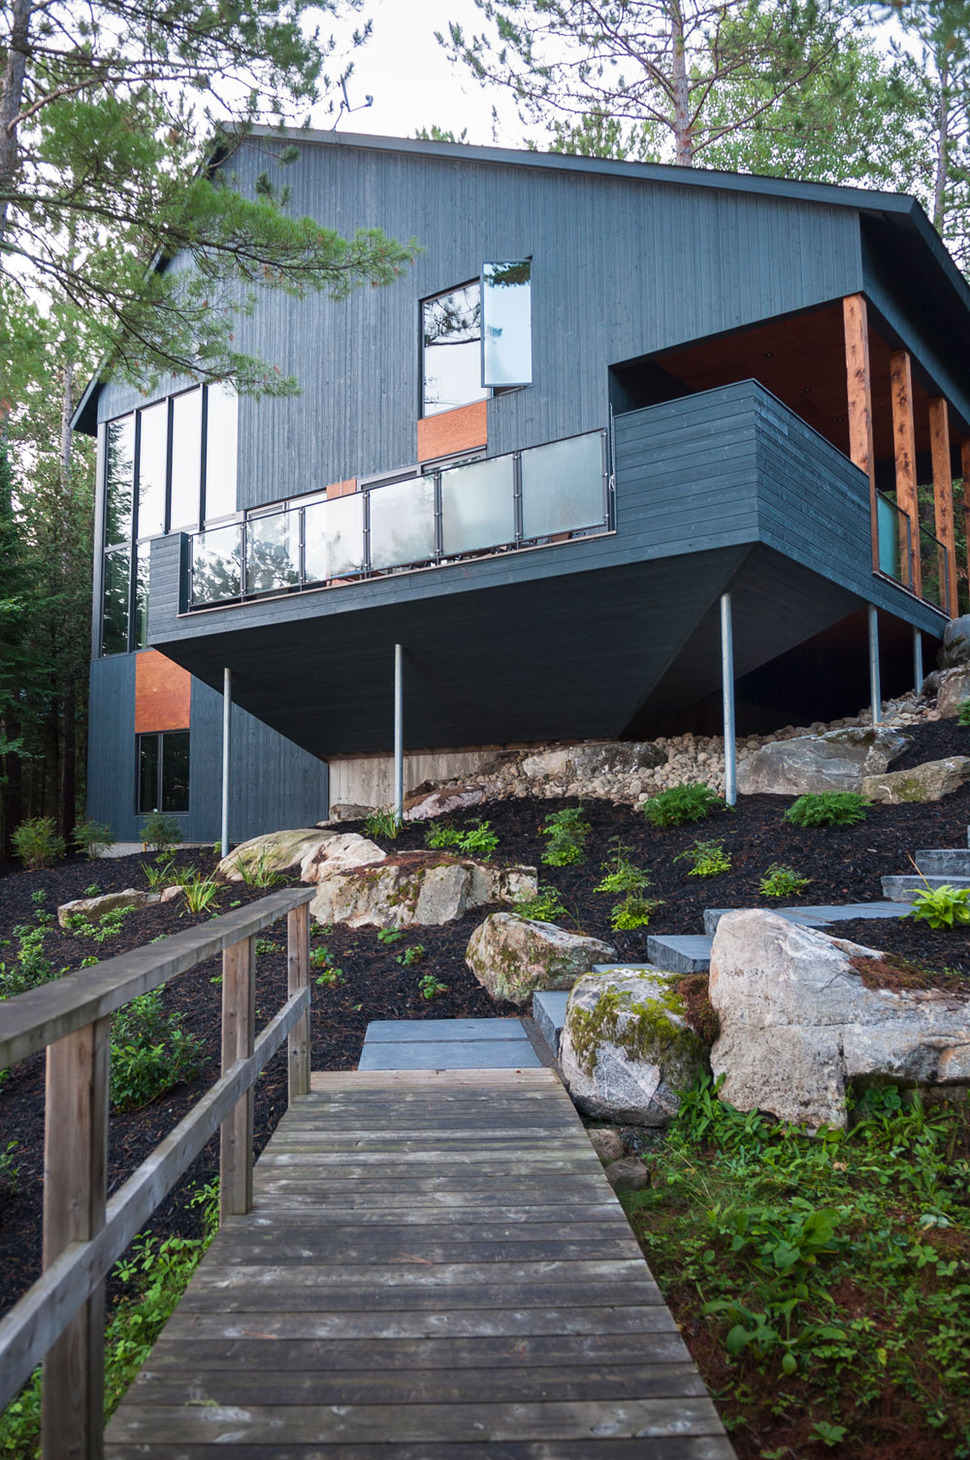 vacation-home-perched-bluff-lakeside-dock-2-exterior.jpg